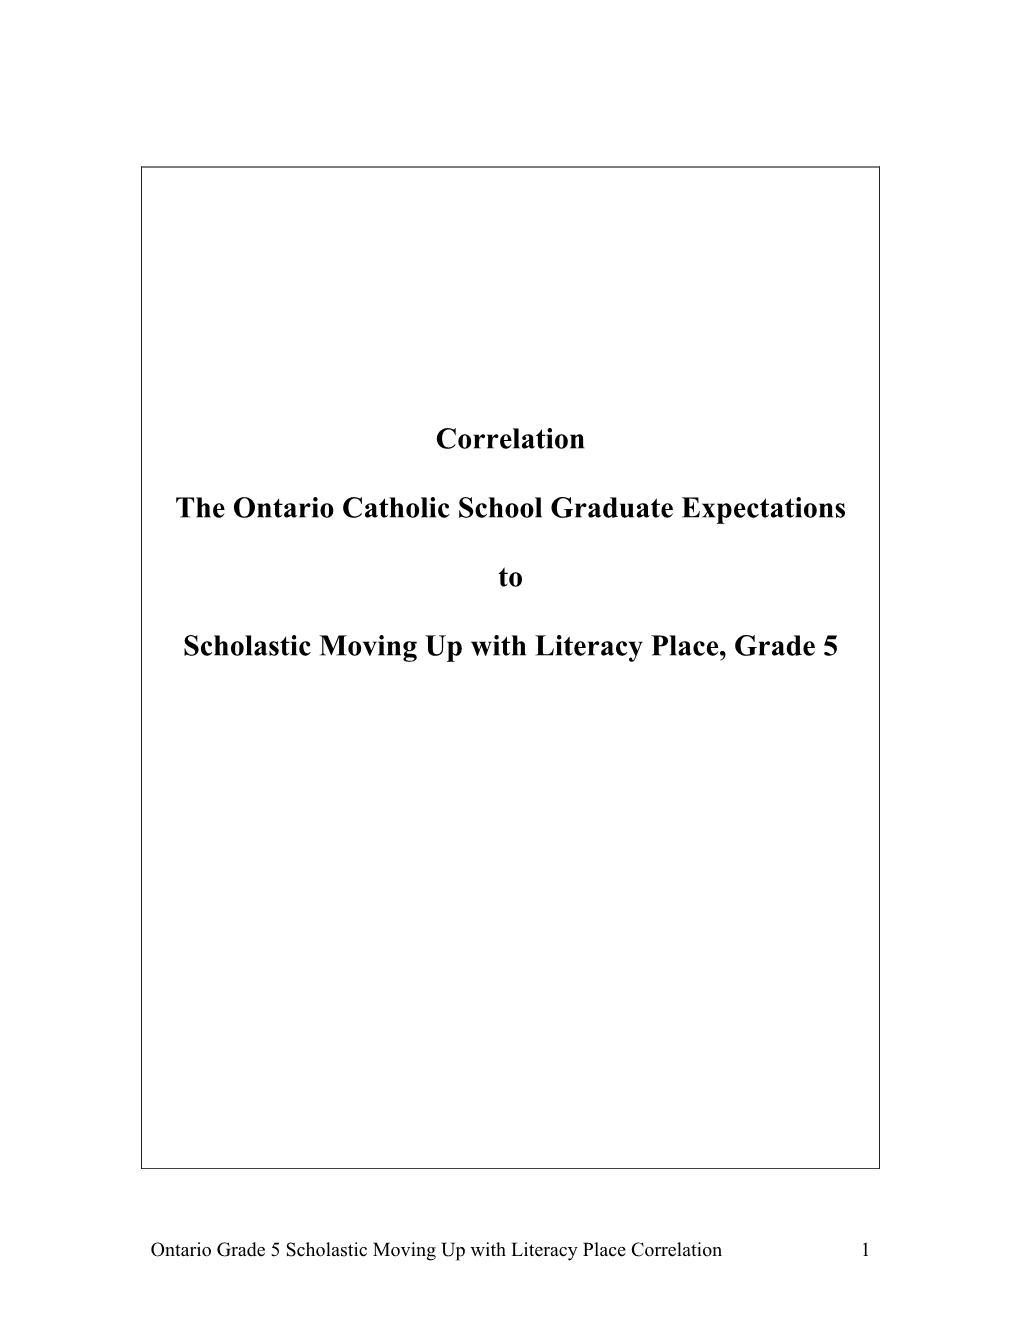 Correlation --- the Ontario Catholic School Graduate Expectations to Scholastic Moving up with Literacy Place, Grade 5